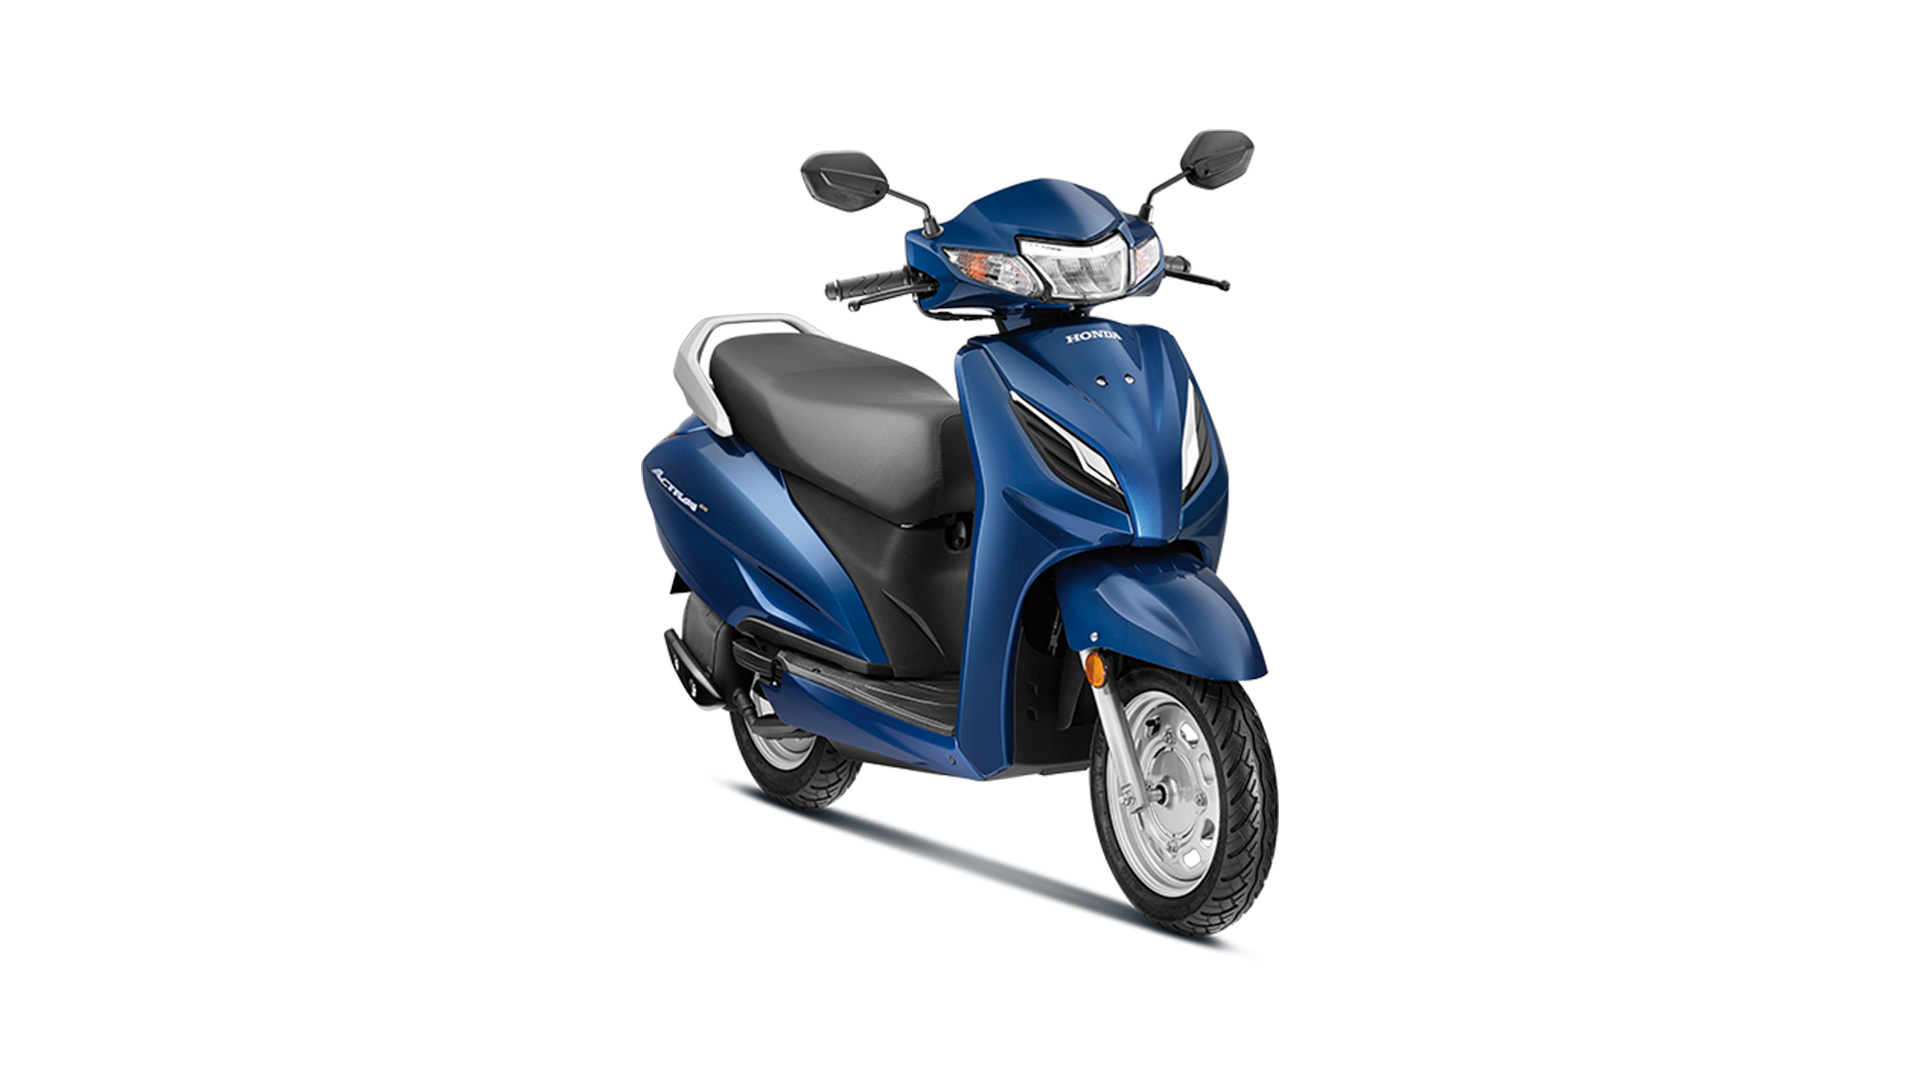 2022 Honda Activa Premium Edition launched at Rs 75,400 - Overdrive